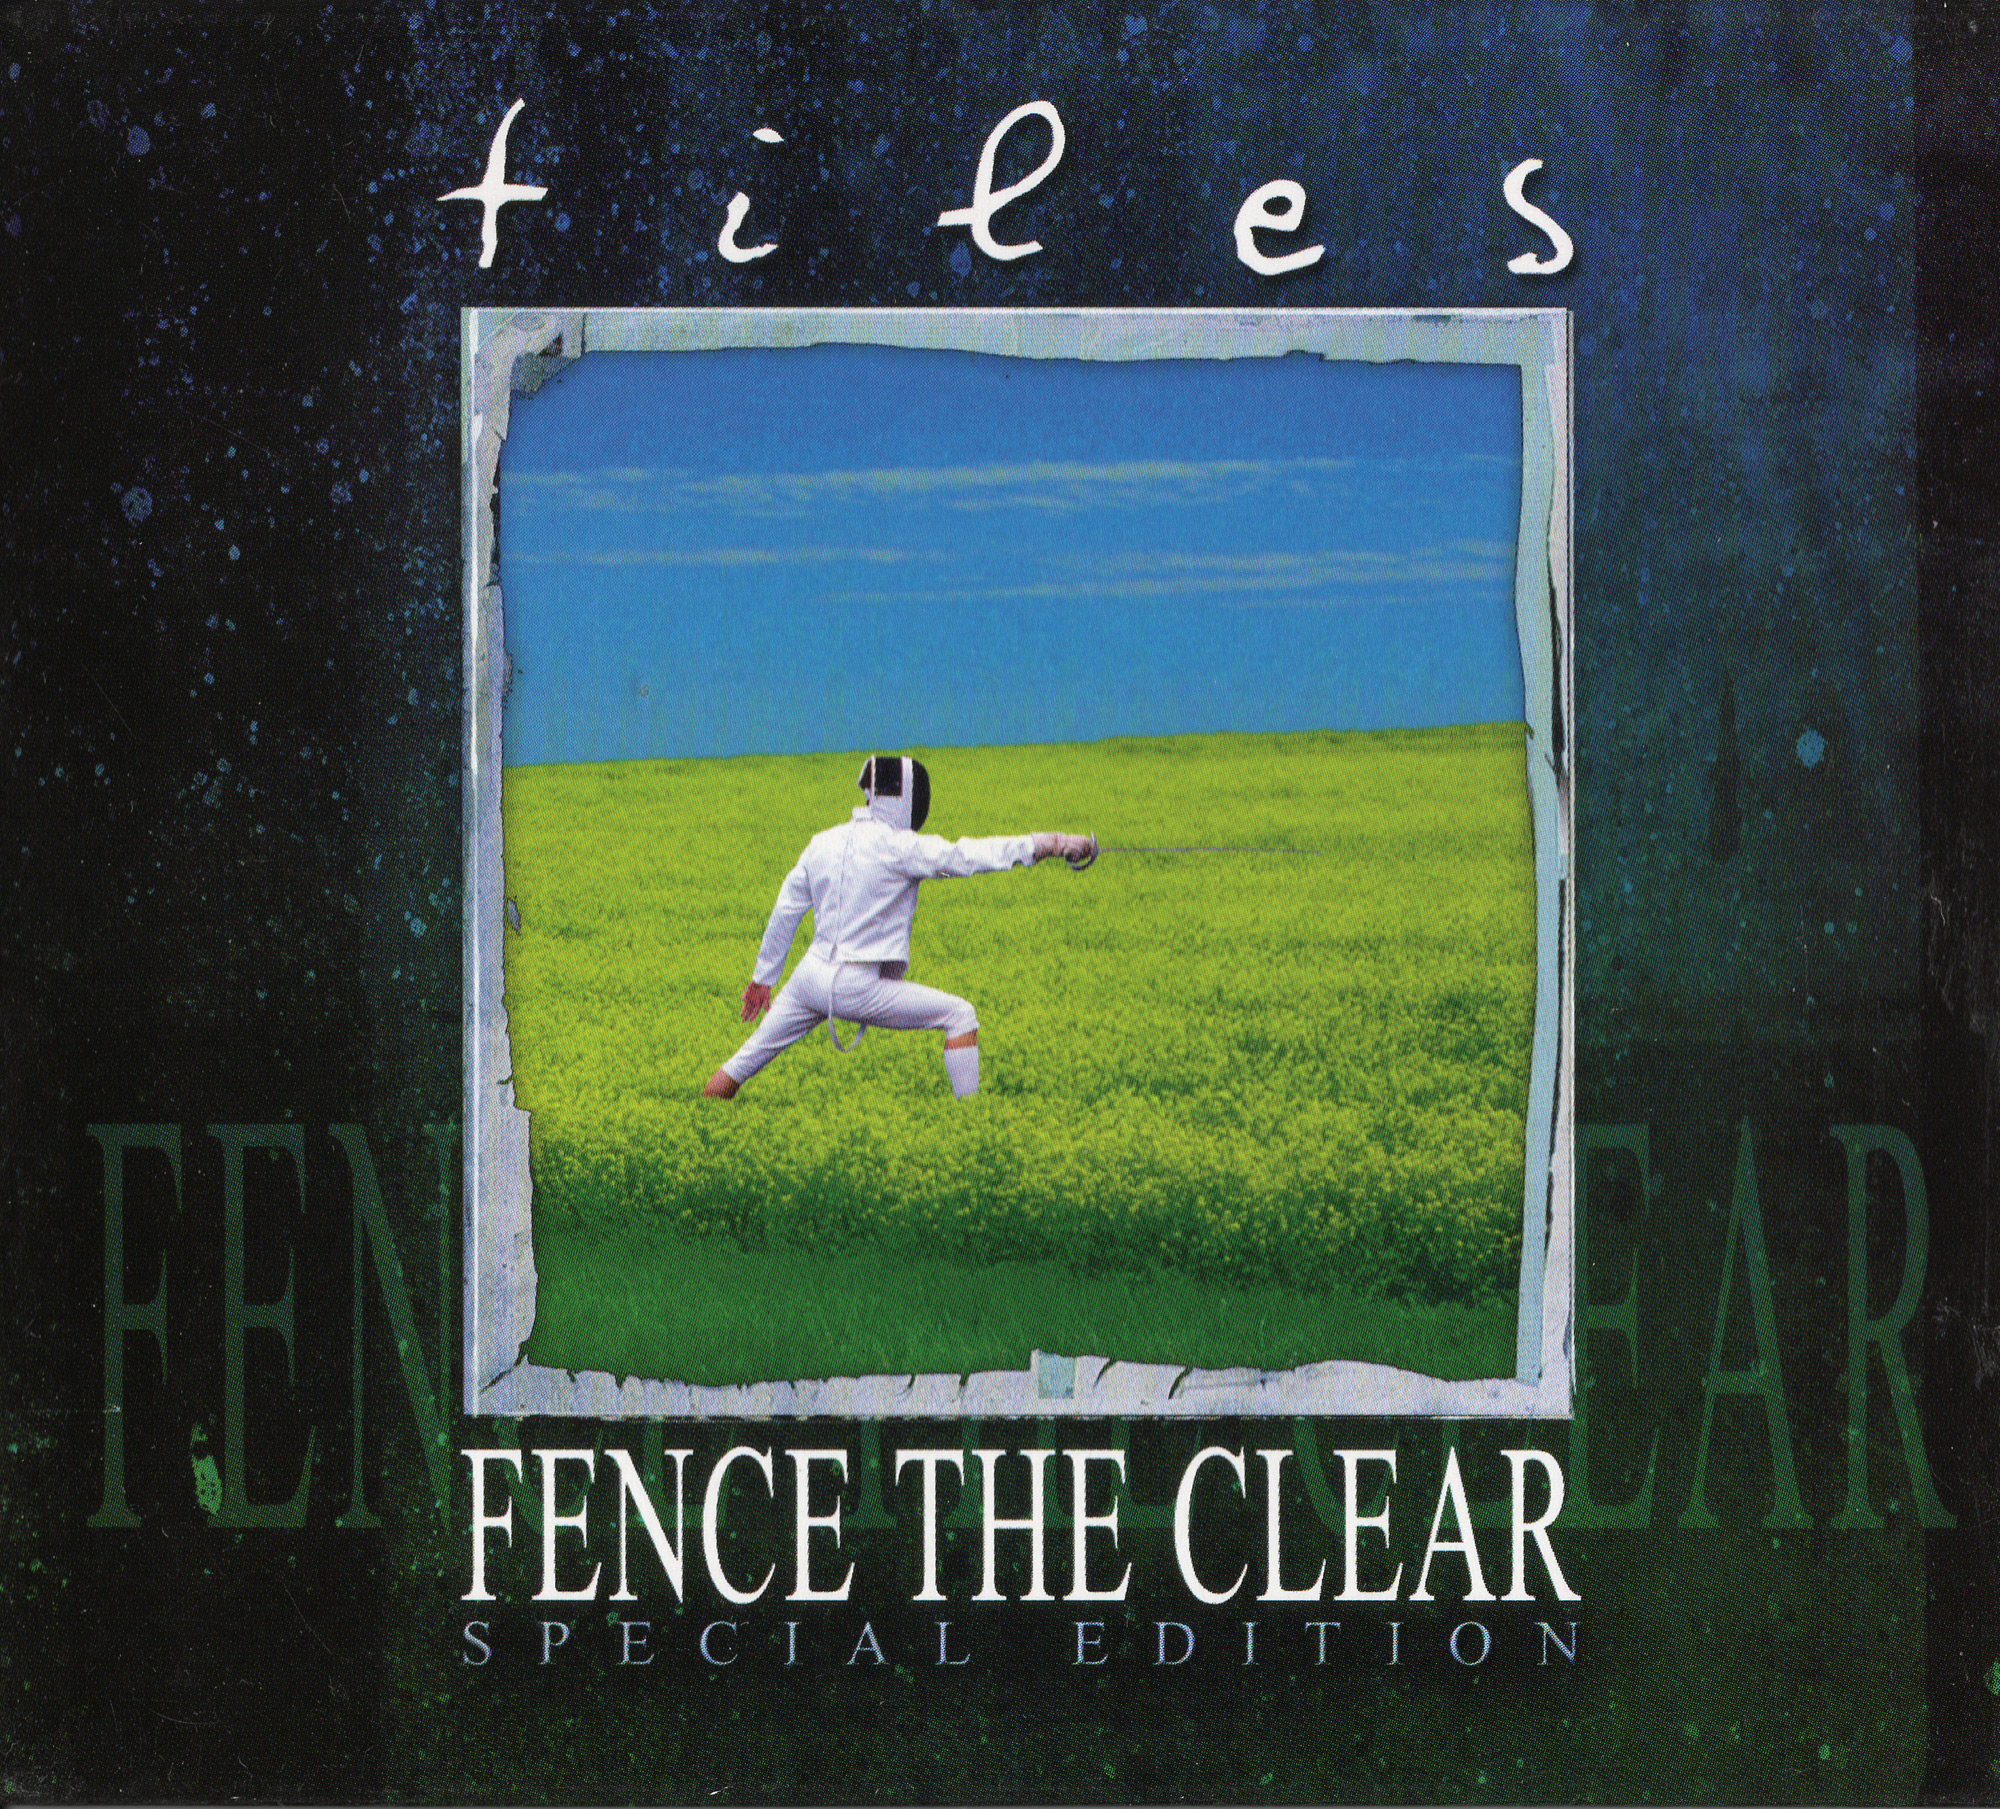 Fence The Clear Special Edition Liner Notes